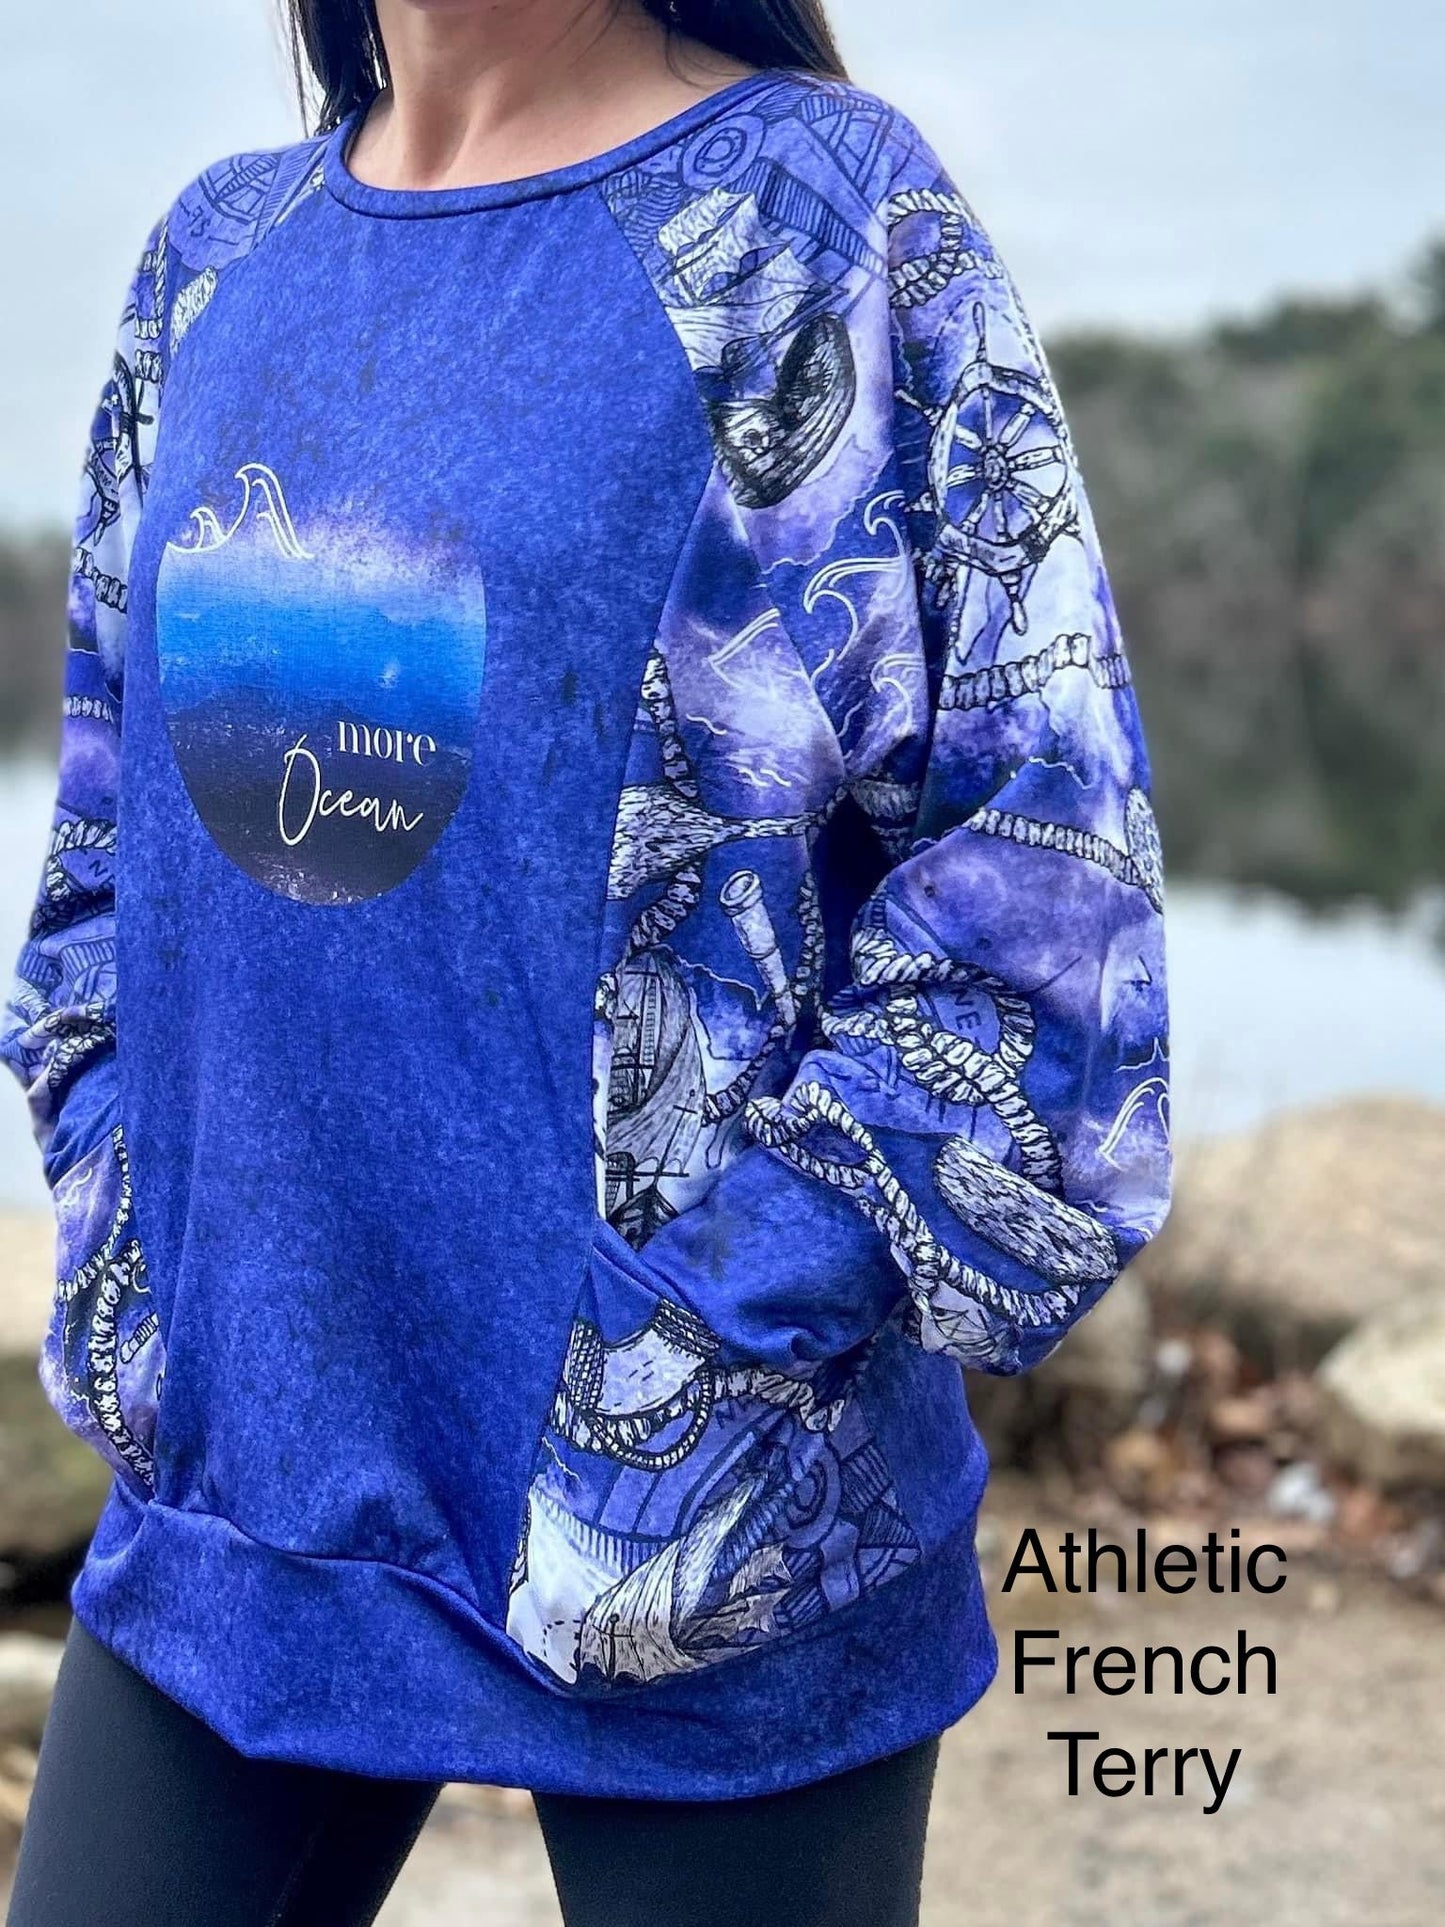 Athletic French Terry: Ocean Panel